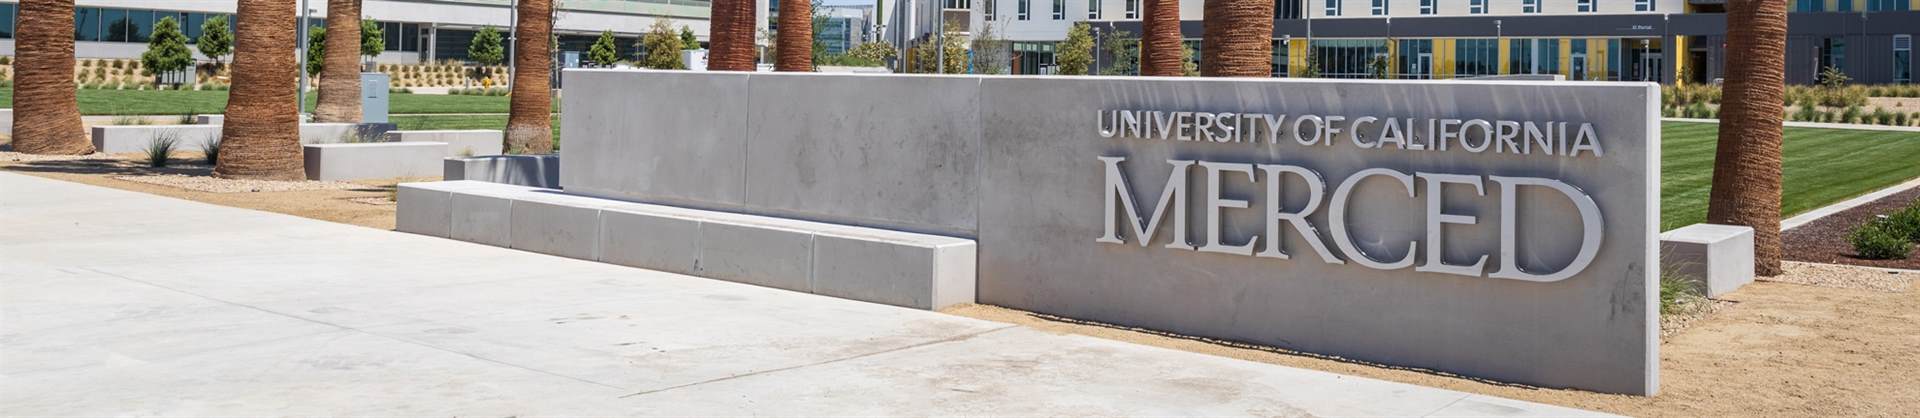 UC Merced campus photo of sign